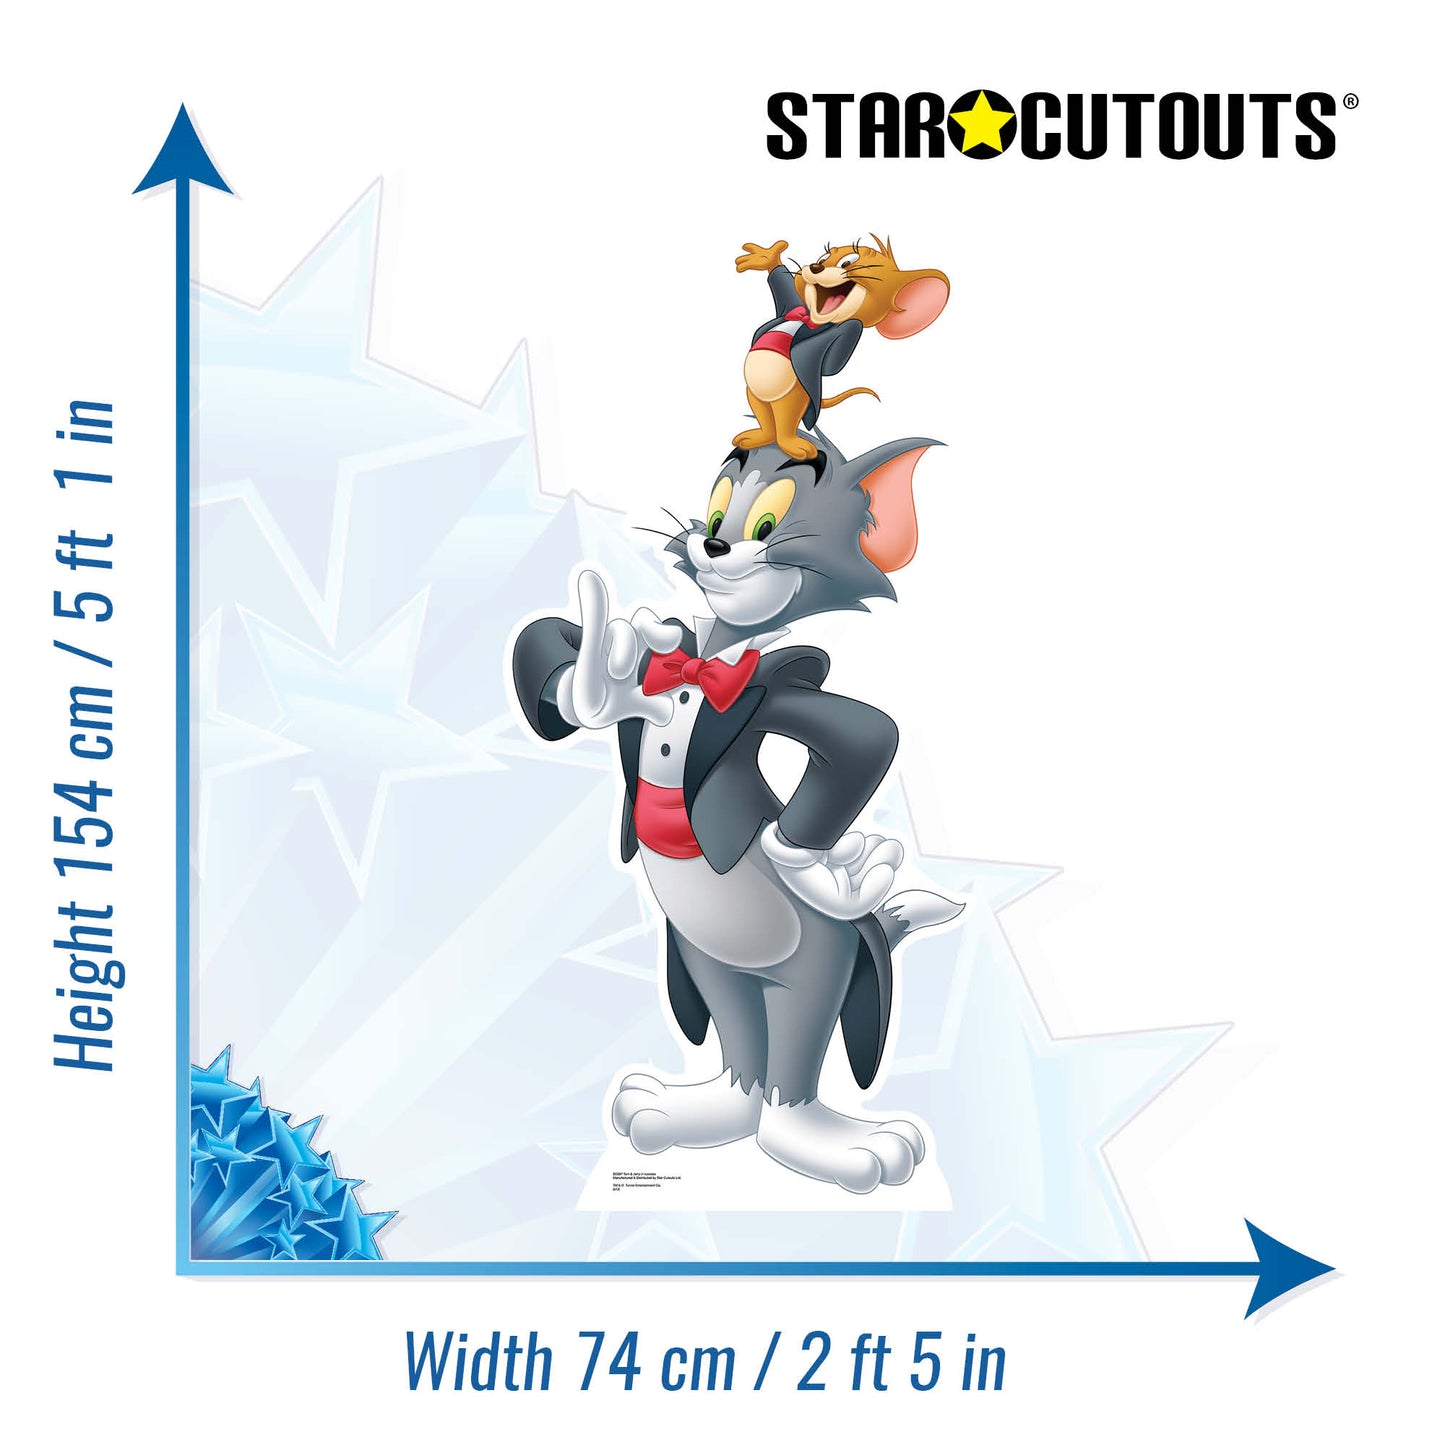 SC697 Tom and Jerry in Tuxedos Cardboard Cut Out Height 154cm